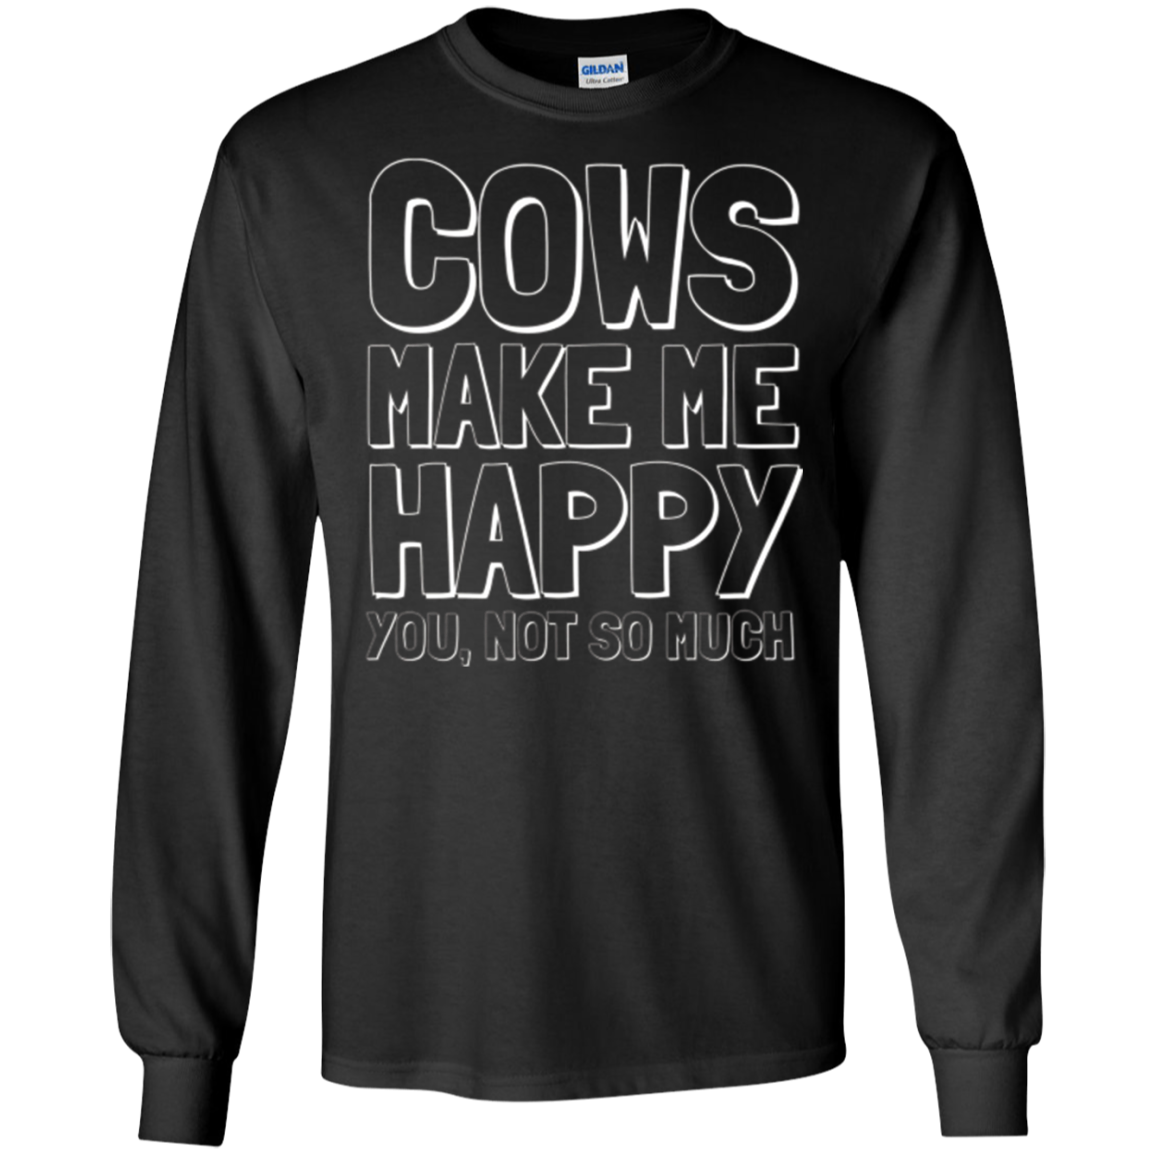 Funny Cow Shirt Cows Make Me Happy You Not So Much T-shirt